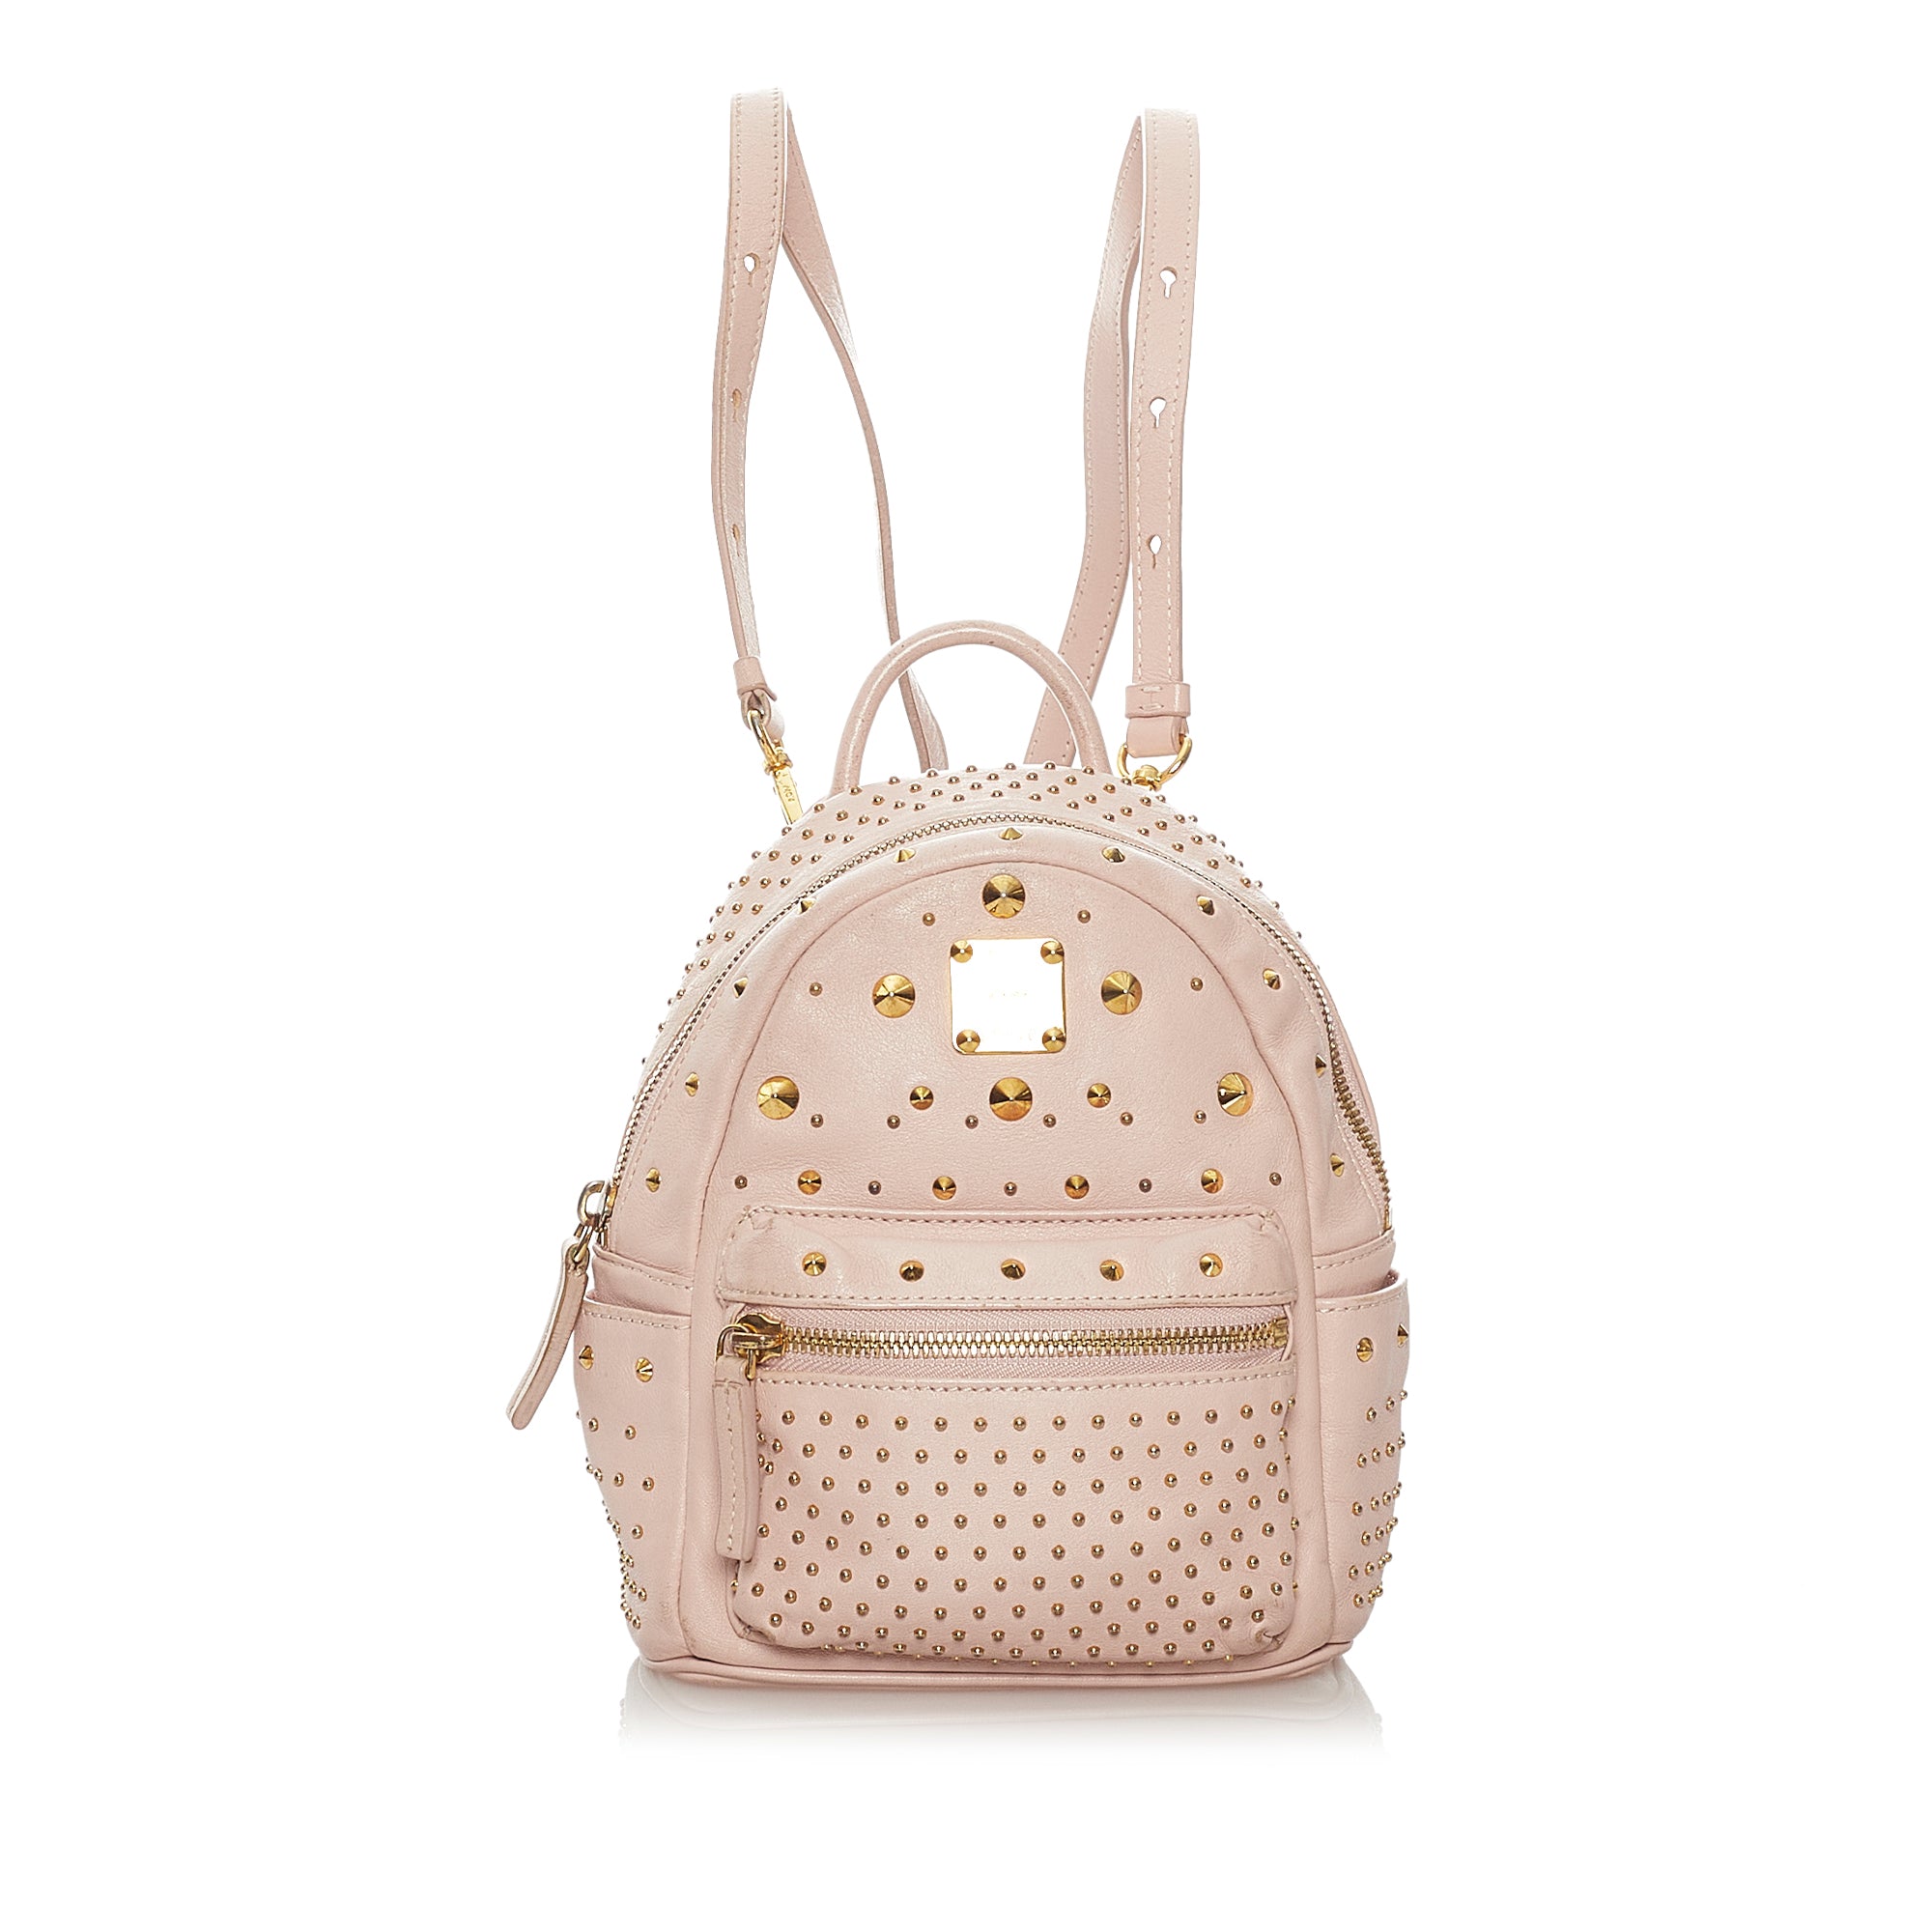 MCM Pink Visetos Coated Canvas and Leather Mini Studded Stark-Bebe Boo Backpack  MCM